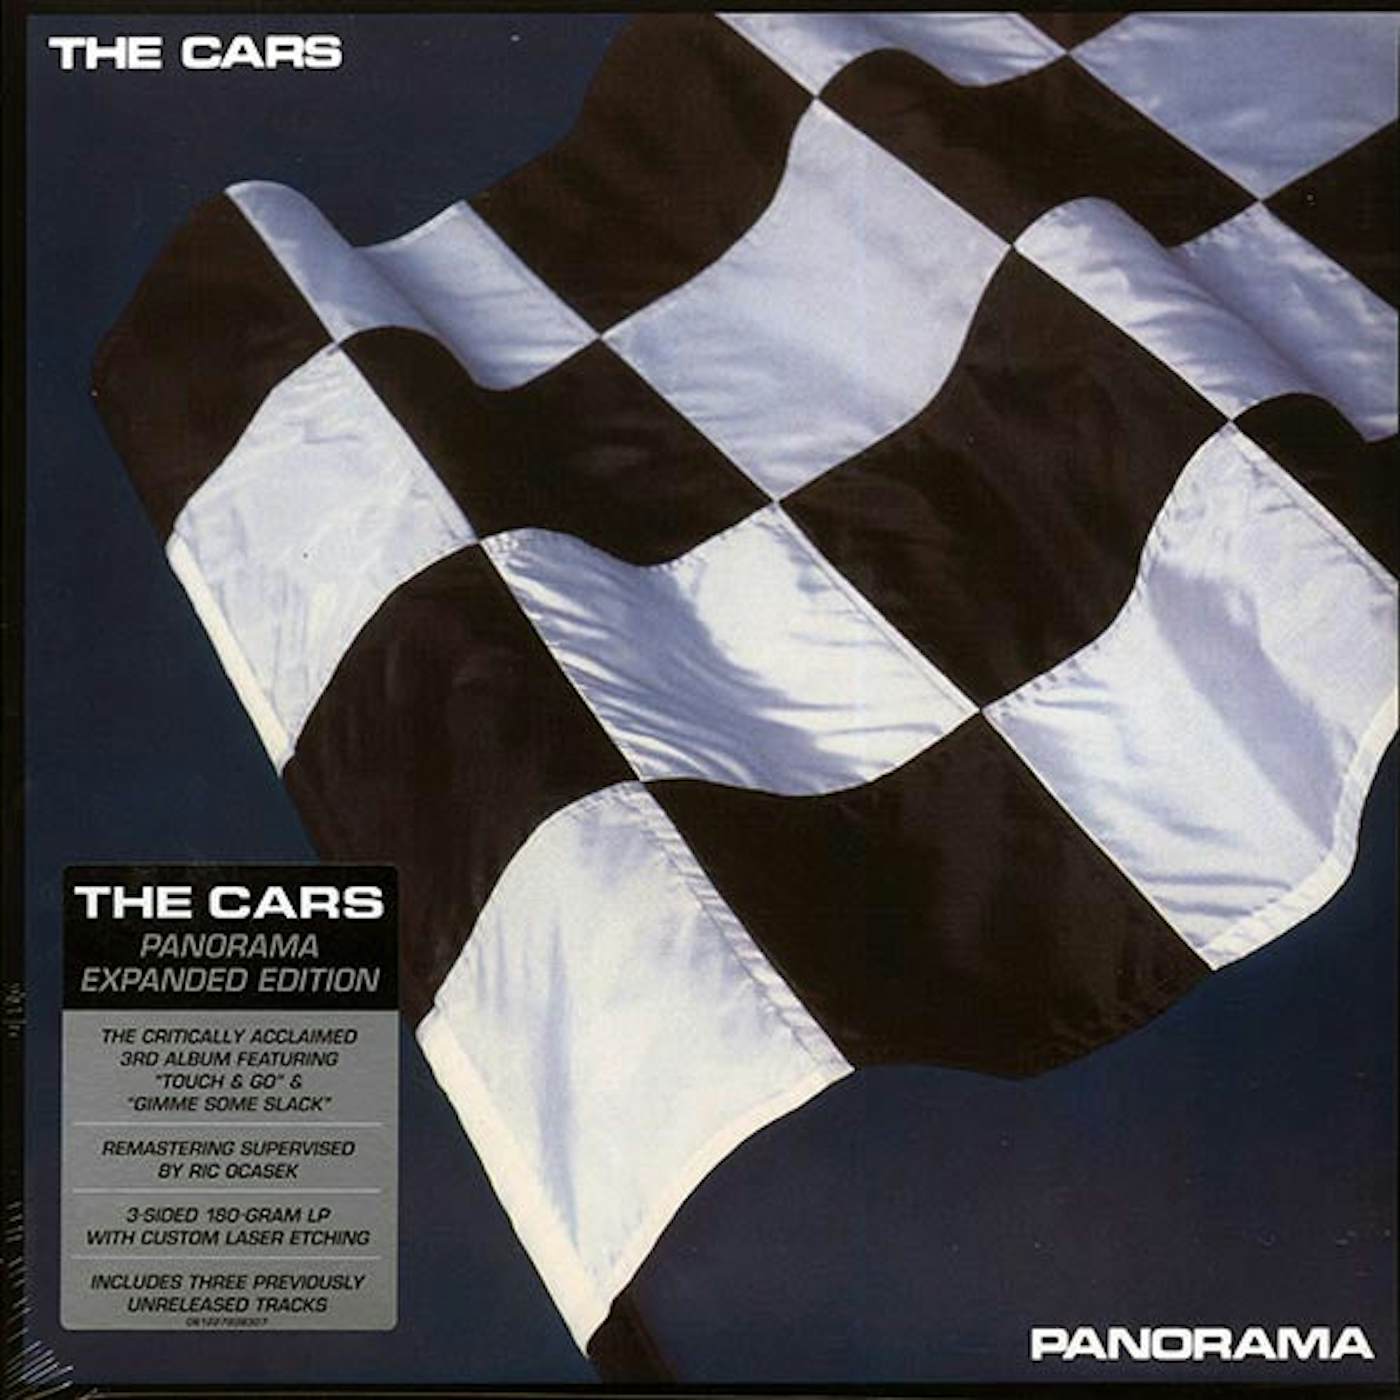  The Cars  LP -  Panorama (2xLP) (180g) (remastered) (expanded edition) (Vinyl)